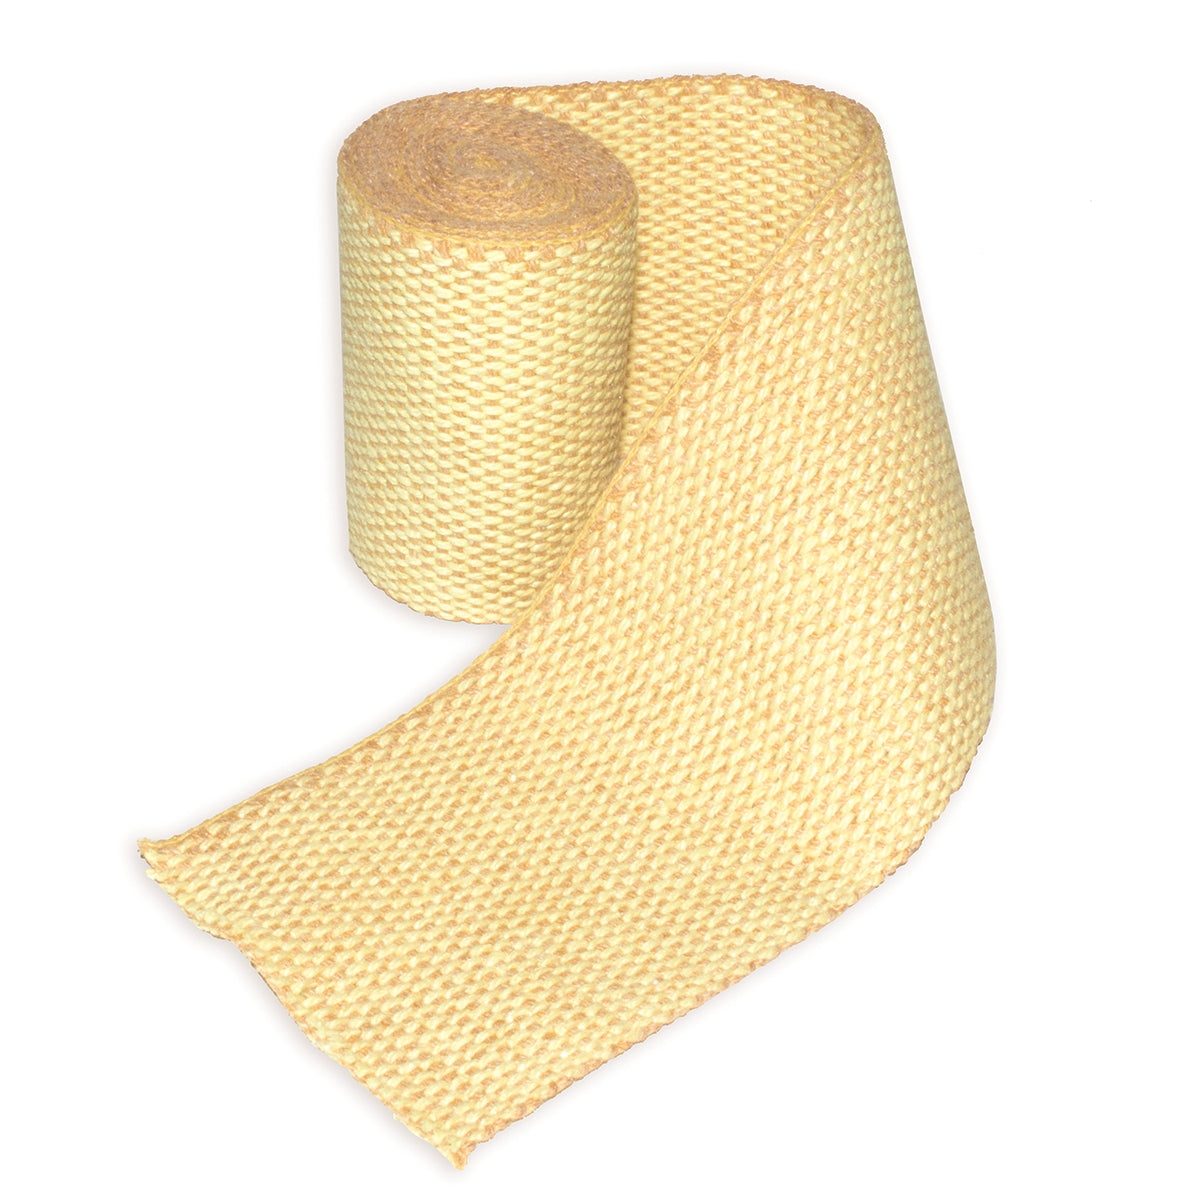 Kevlar Wick 3 Inch width - Per Foot - 1/8th inch thick